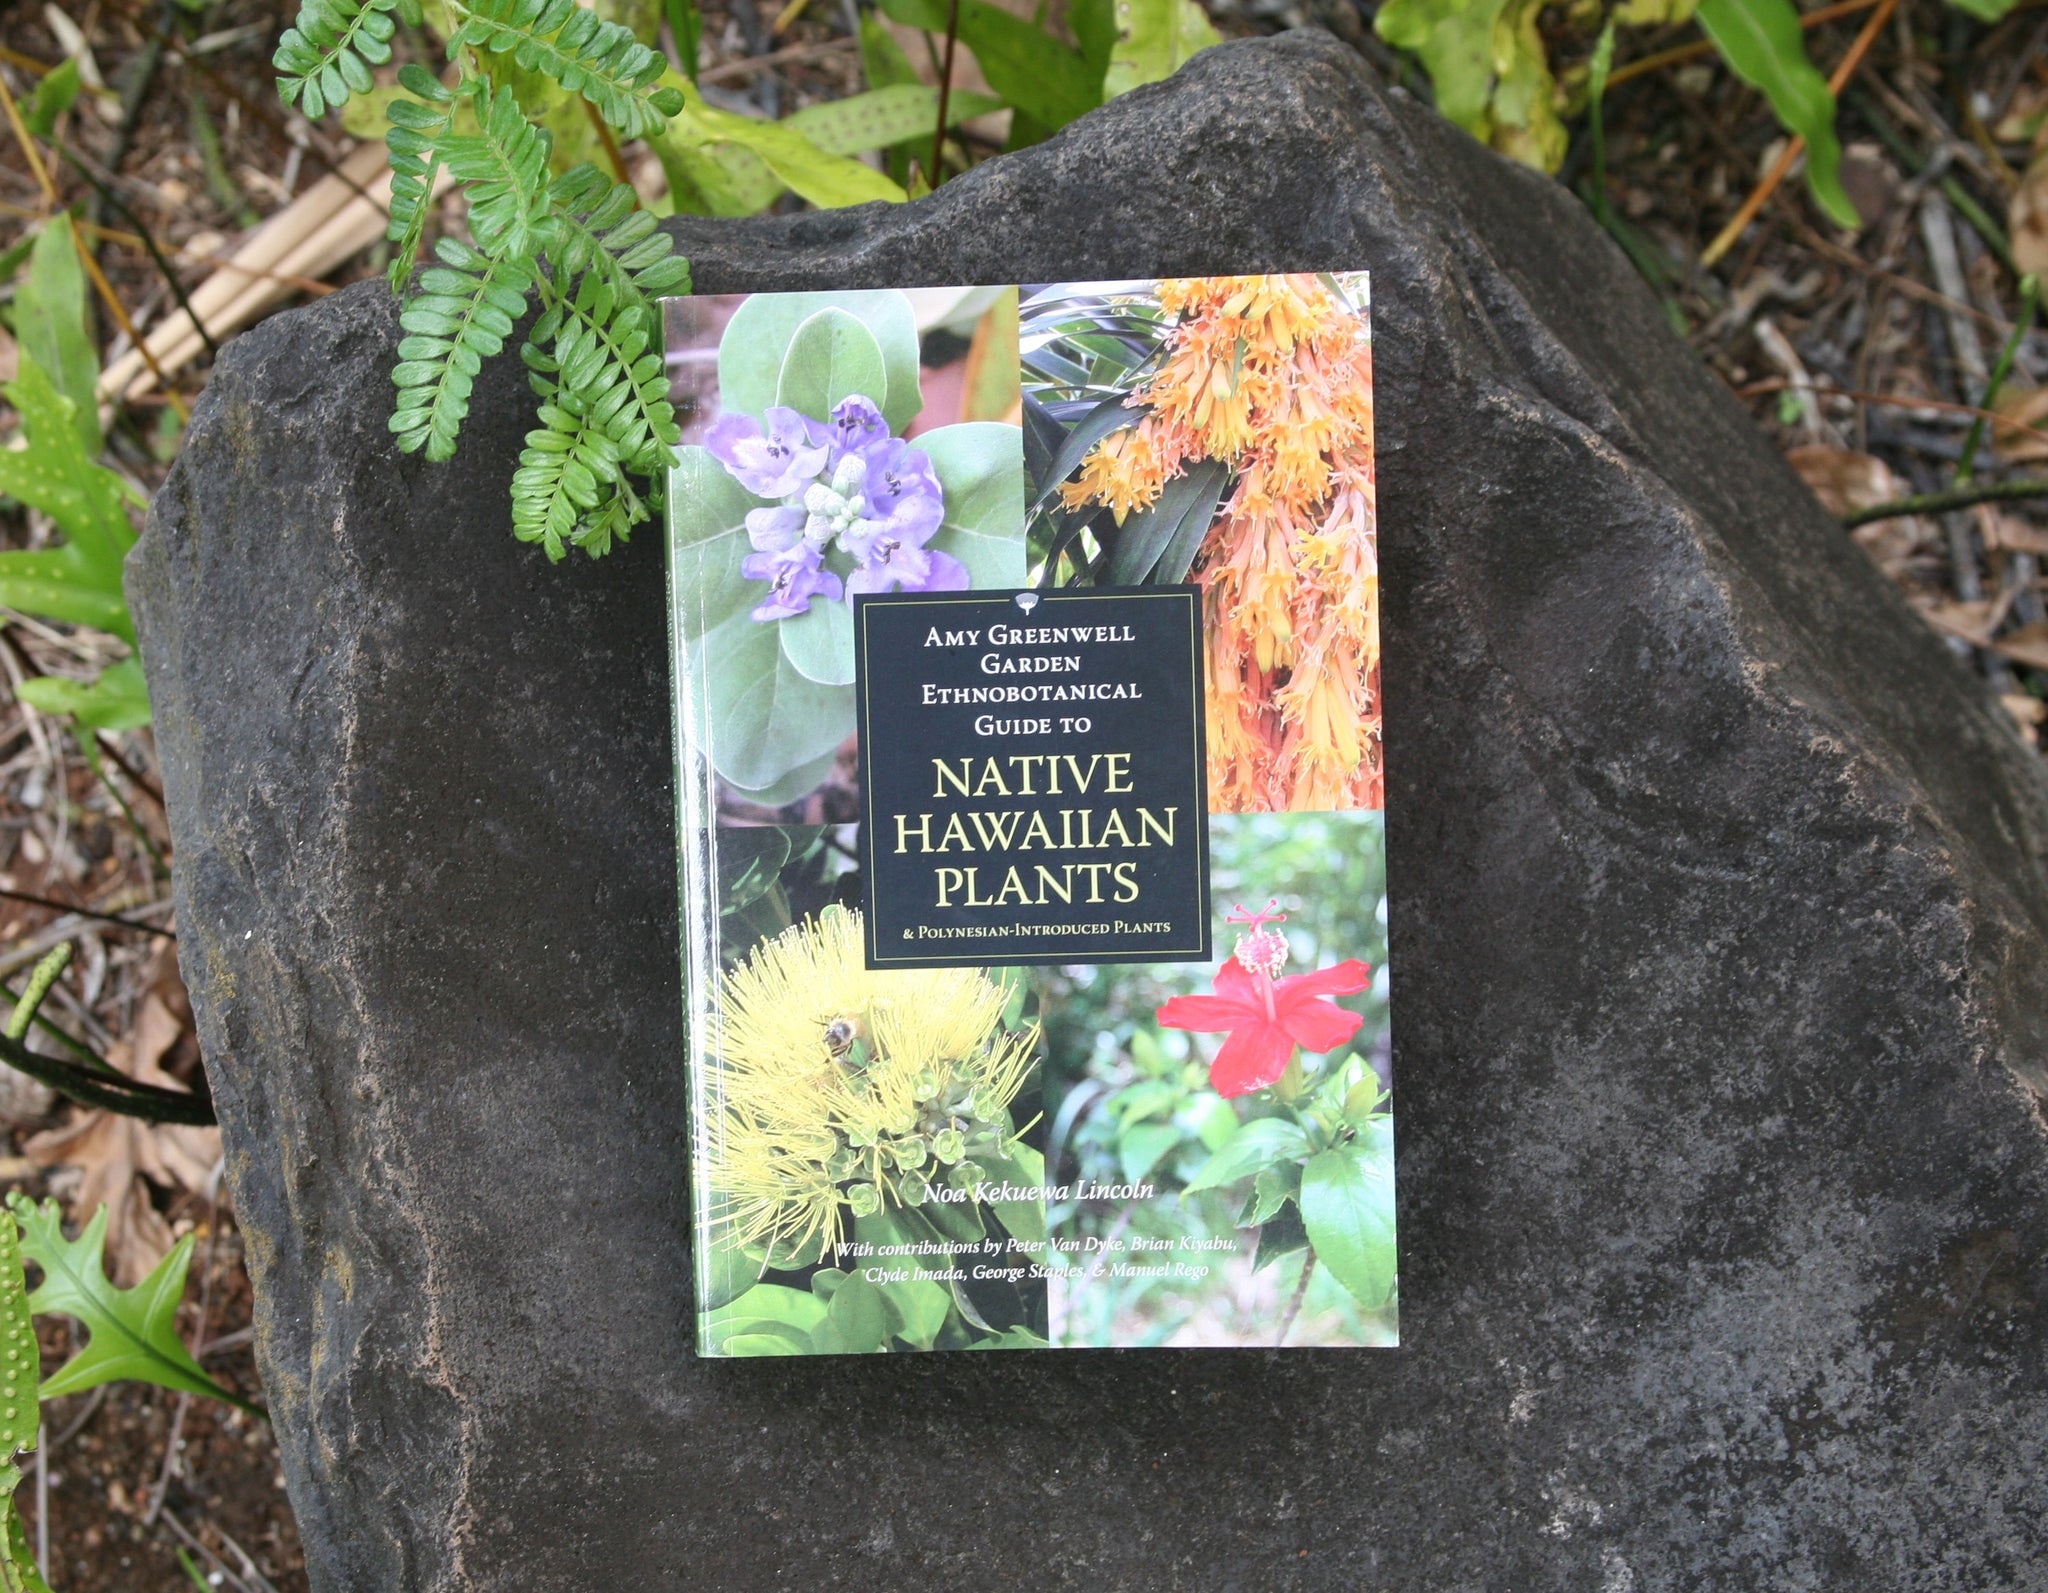 The Amy Greenwell Garden Ethnobotanical Guide to Native Hawaiian Plants & Polynesian-Introduced Plants